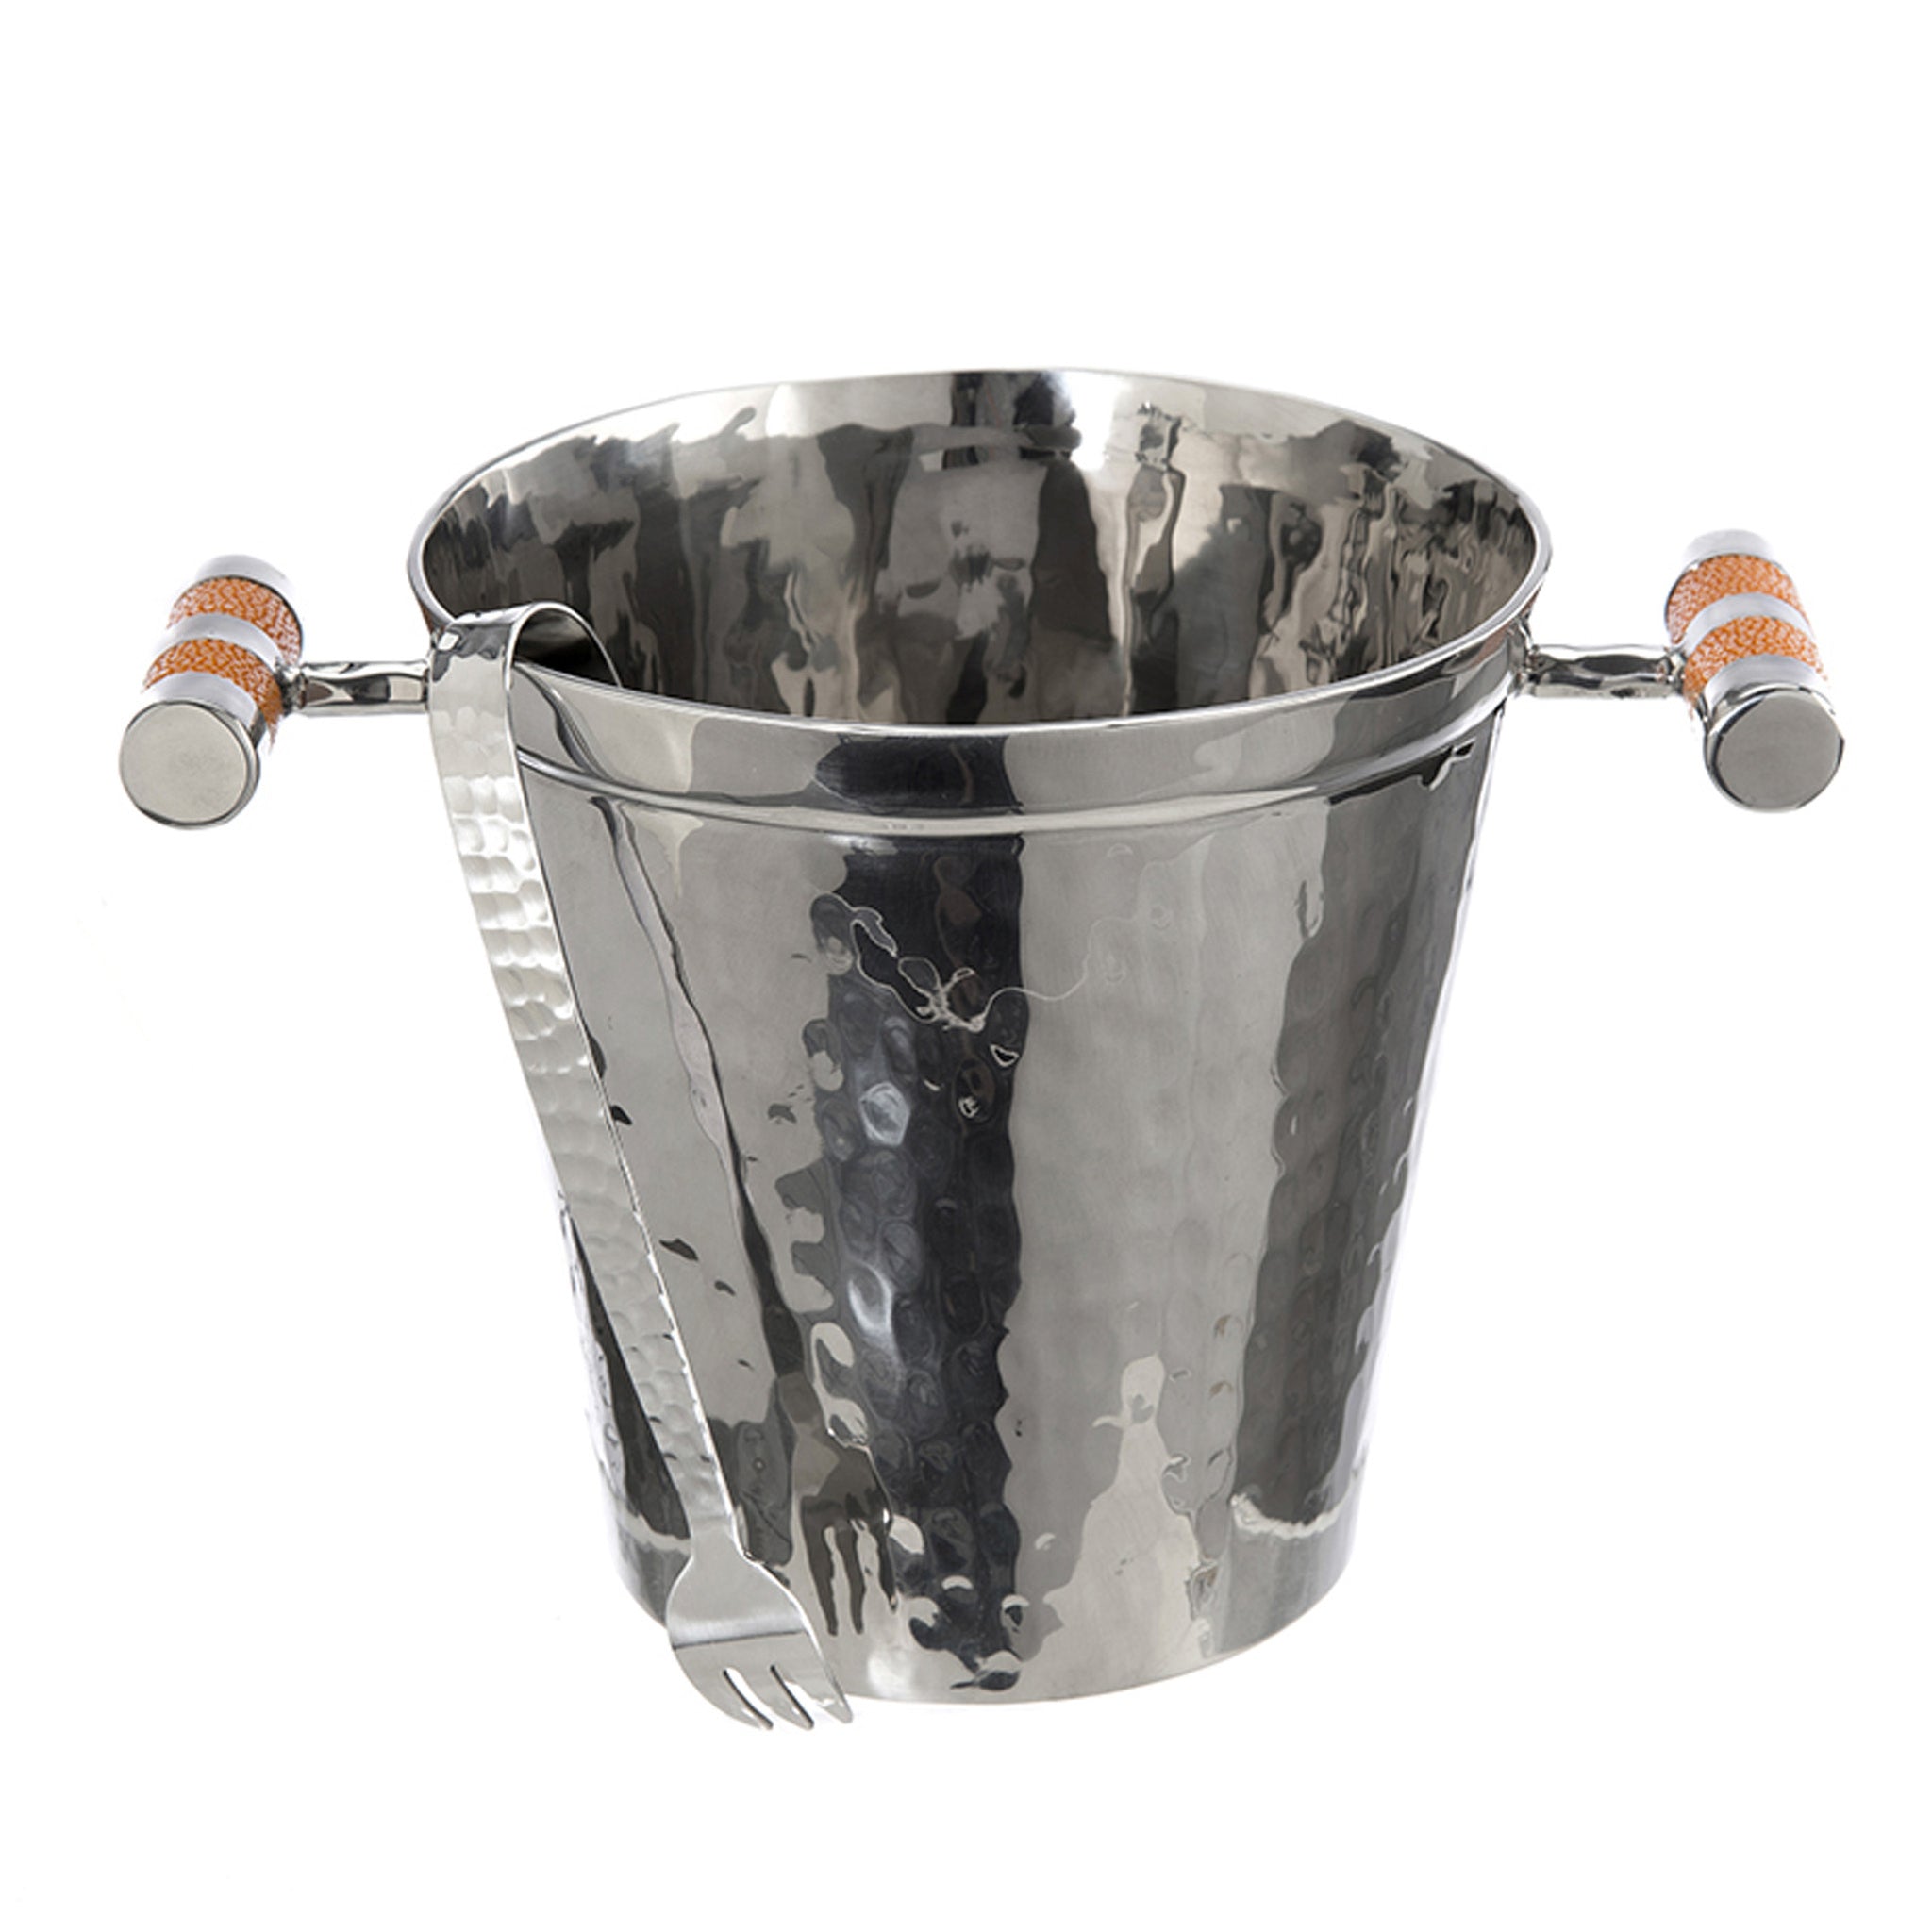 Hammered Stainless Steel Ice Bucket With Tongs